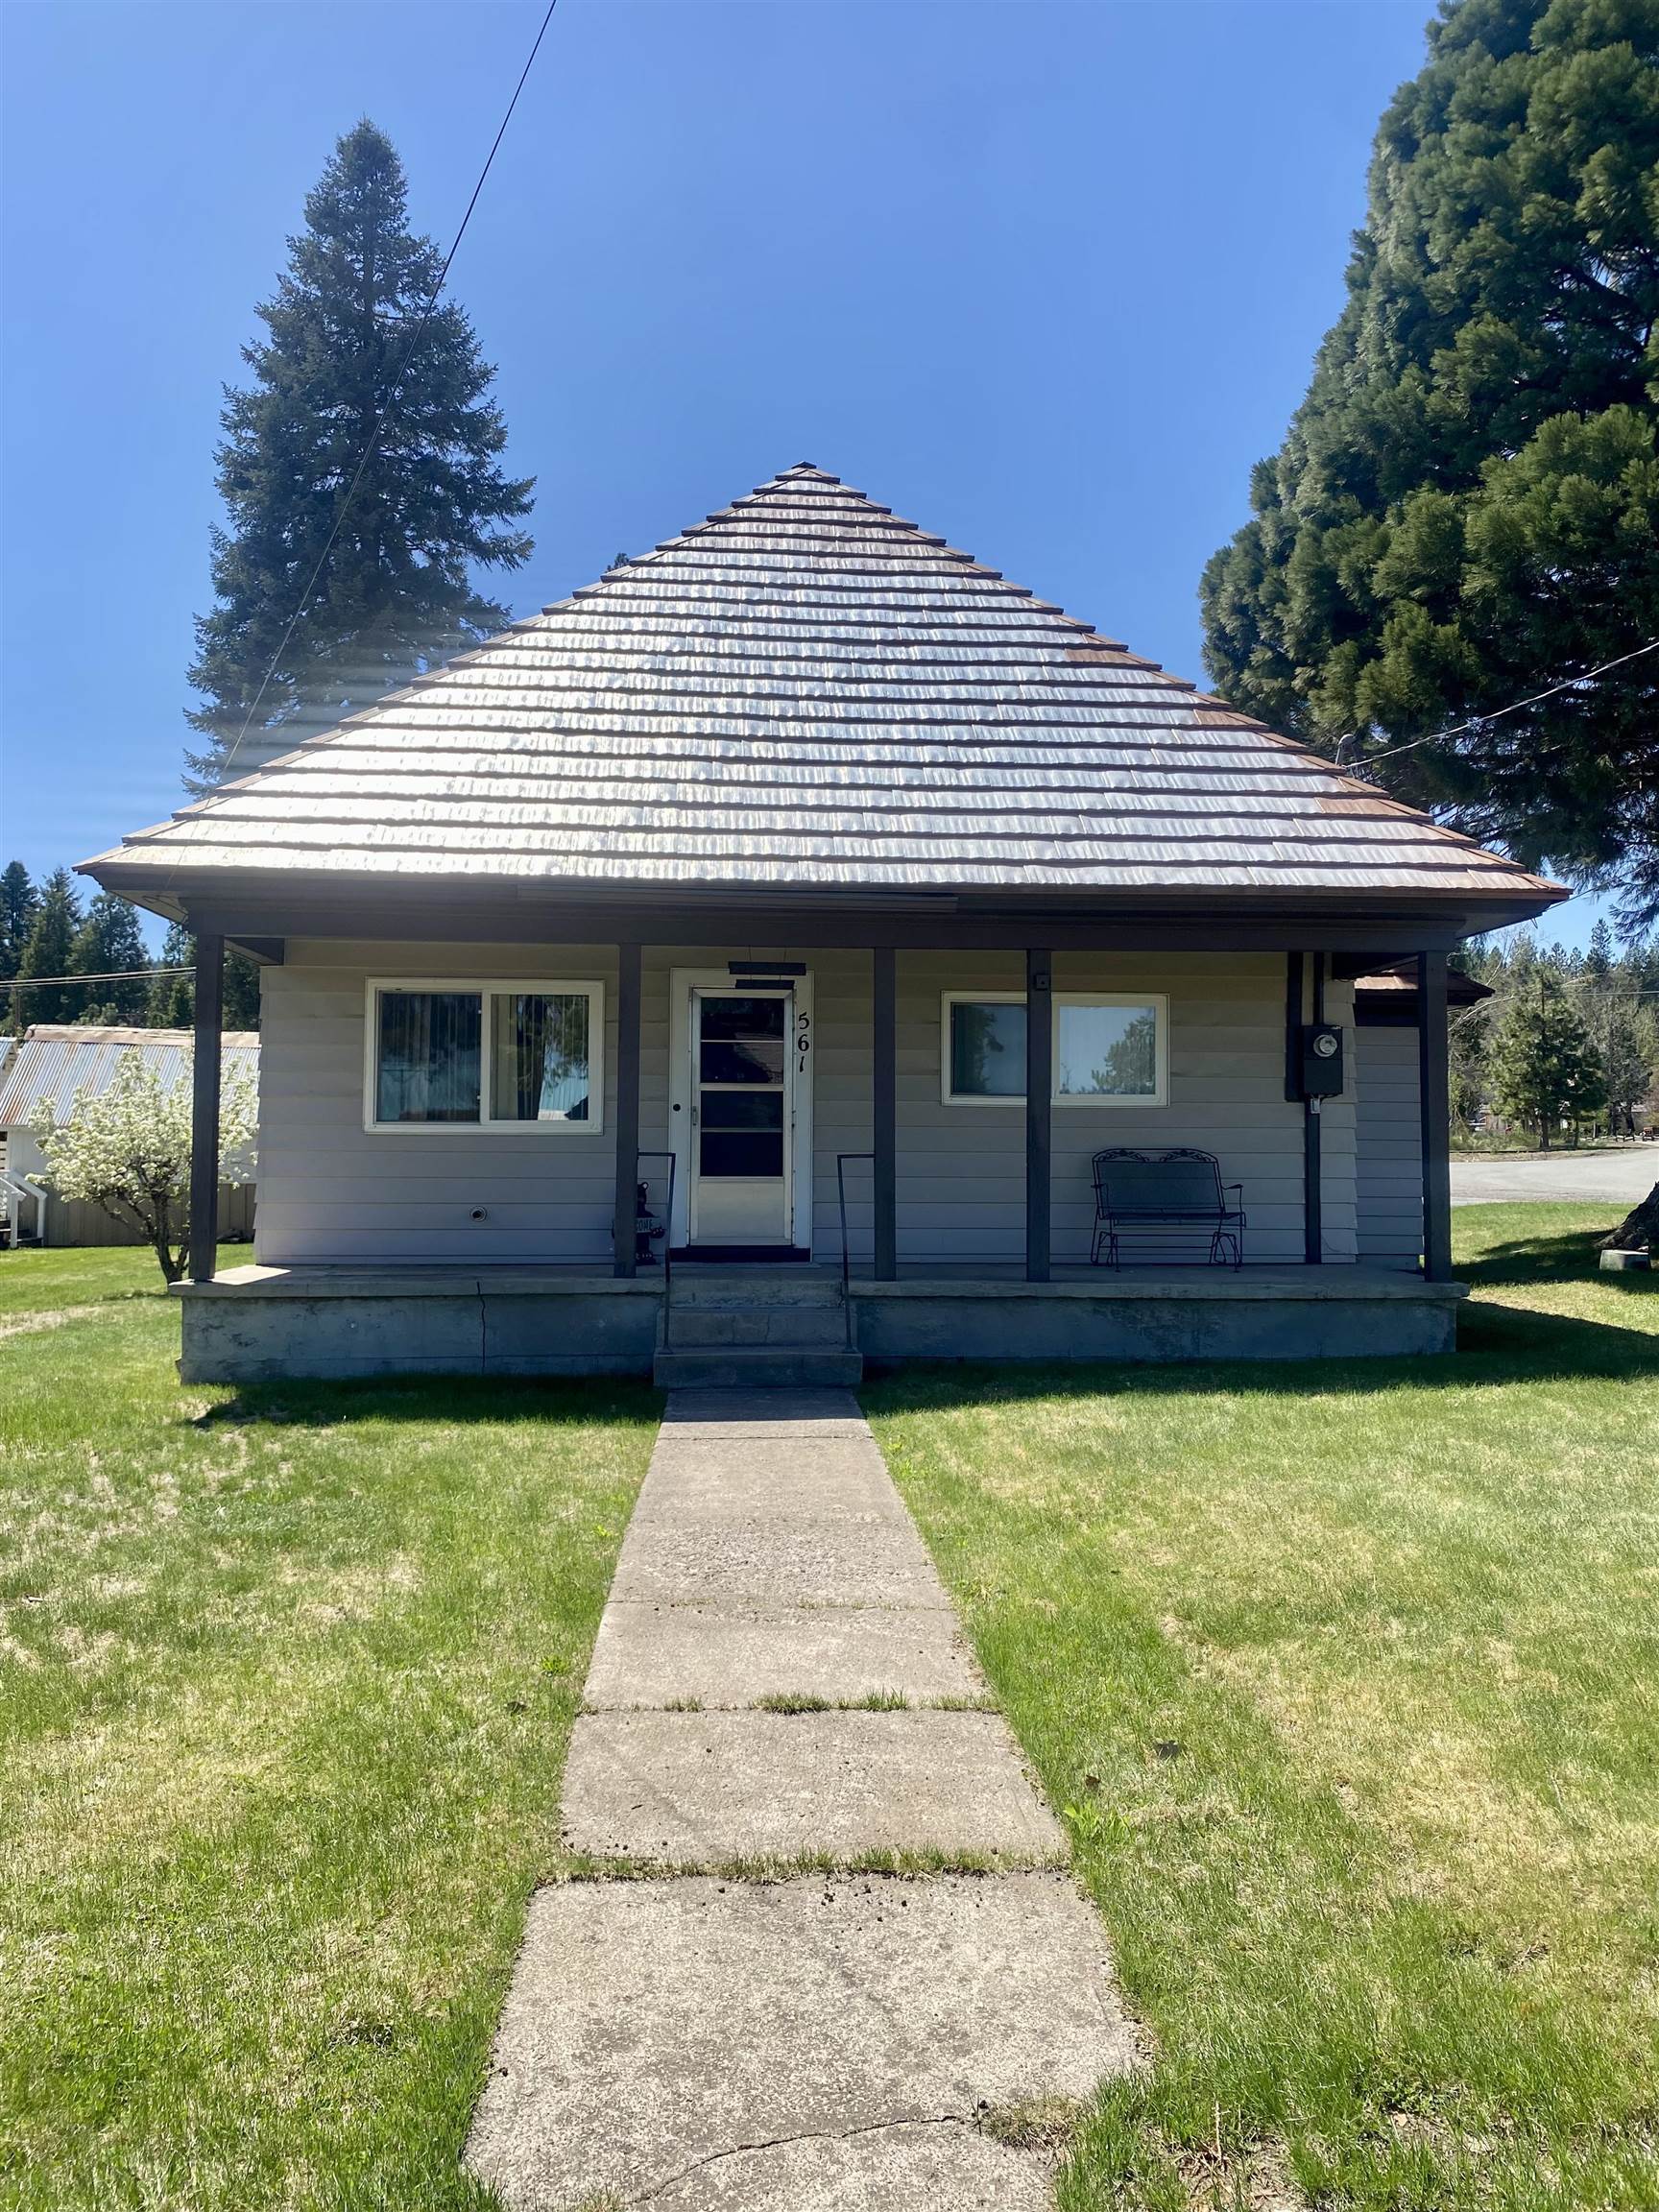 You have the opportunity of purchasing one of the first Mill Homes built in the BEAUTIFUL town of McCloud CA. This 3/2 sits on one of the biggest corner lots, directly across from the Fire Station & walking distance to Main Street, which resembles a scene right out of a Hallmark Movie. Tall ceilings, large great room, large bright windows, an oversized kitchen, wood burning stoves, & Beautiful wood floors! This well-cared Oasis is ready for the right person to make their own! Pour a cup of coffee or your favorite beverage and enjoy the views of Mt. Shasta right from the front porch! An outdoor enthusiast dream town. A beautiful place to call home!